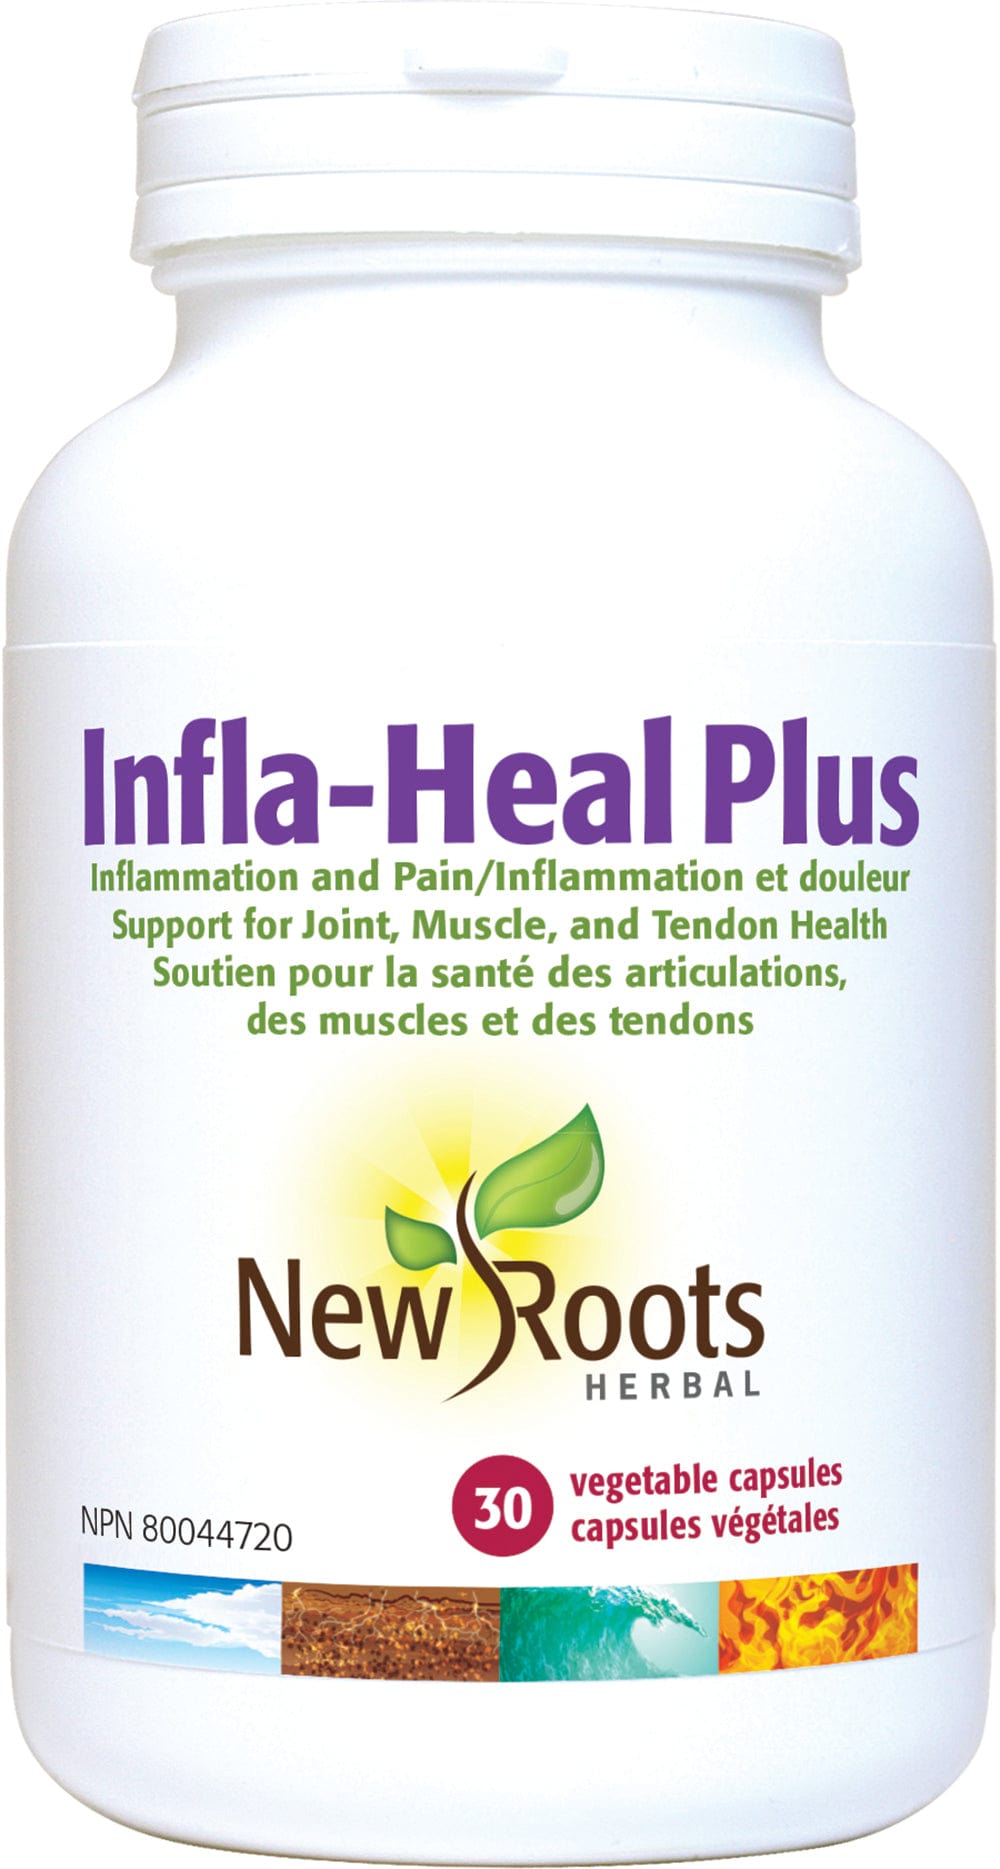 NEW ROOTS HERBAL Suppléments Infla-Heal Plus / Infla-soin 30comp